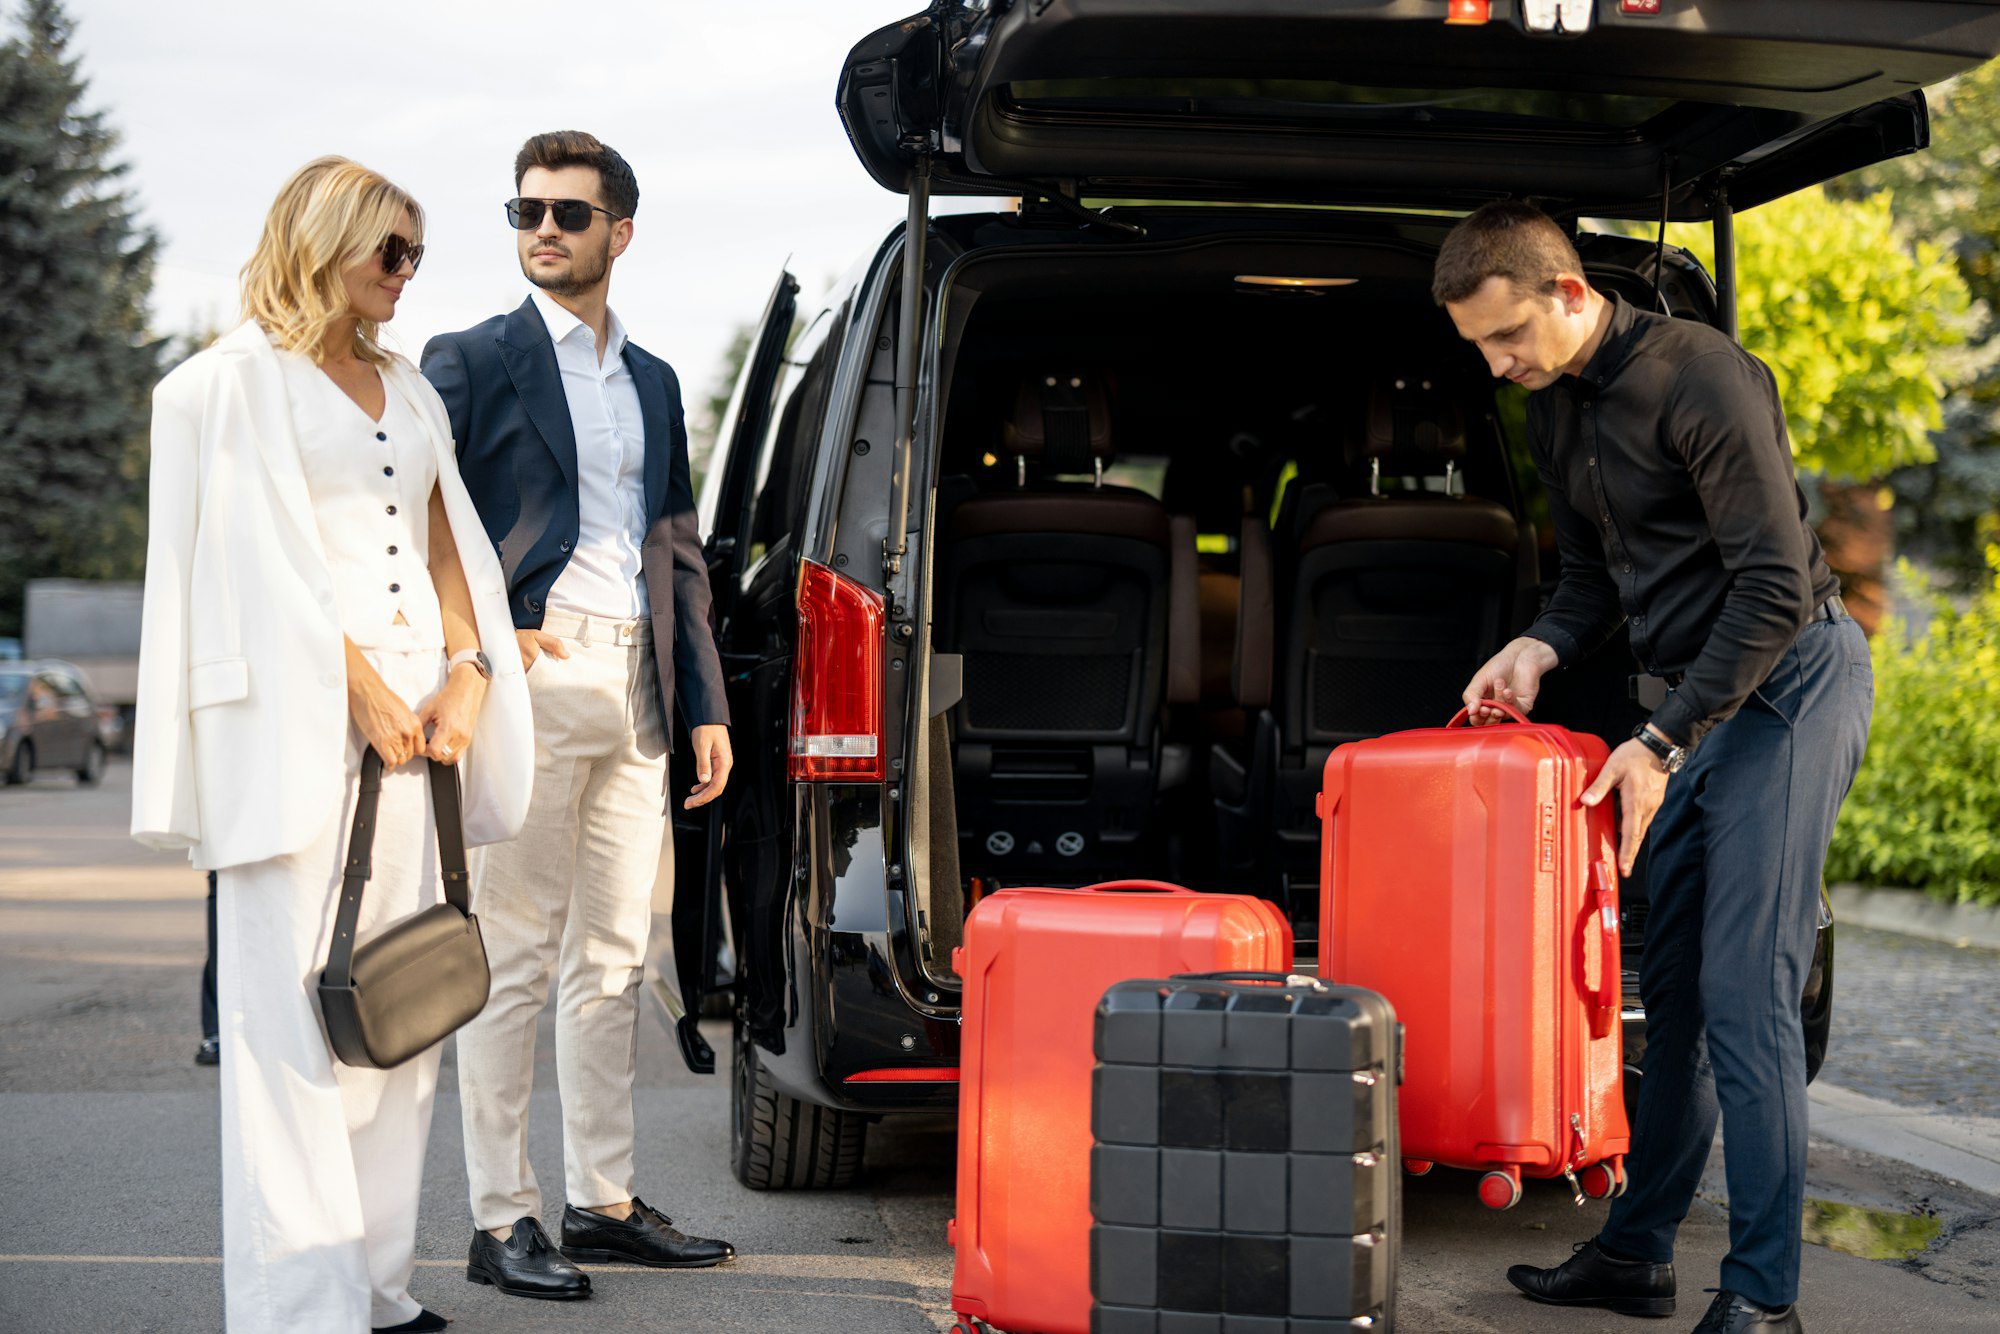 Business couple near minivan Buffalo Niagara Airport taxi with a suitcases and chauffeur